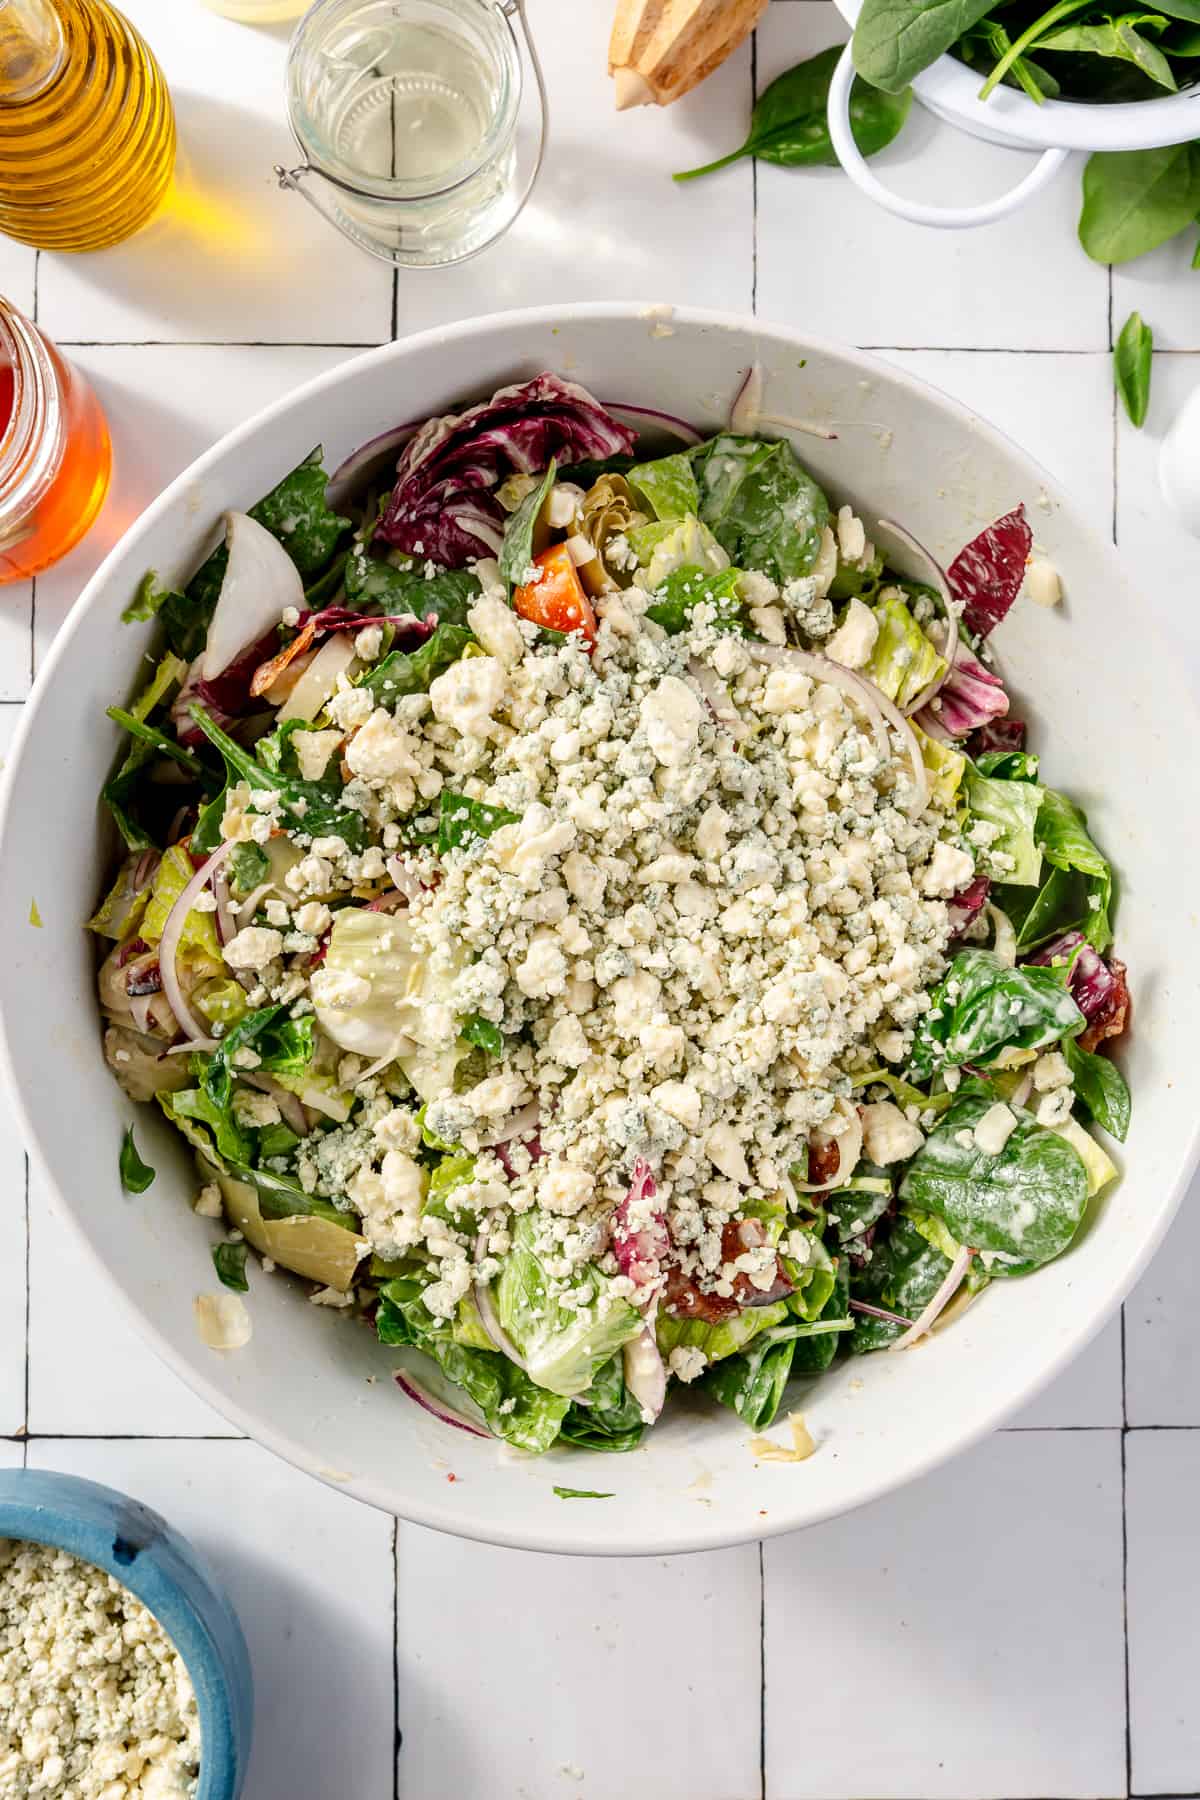 Tossed salad in large white bowl with gorgonzola on top.